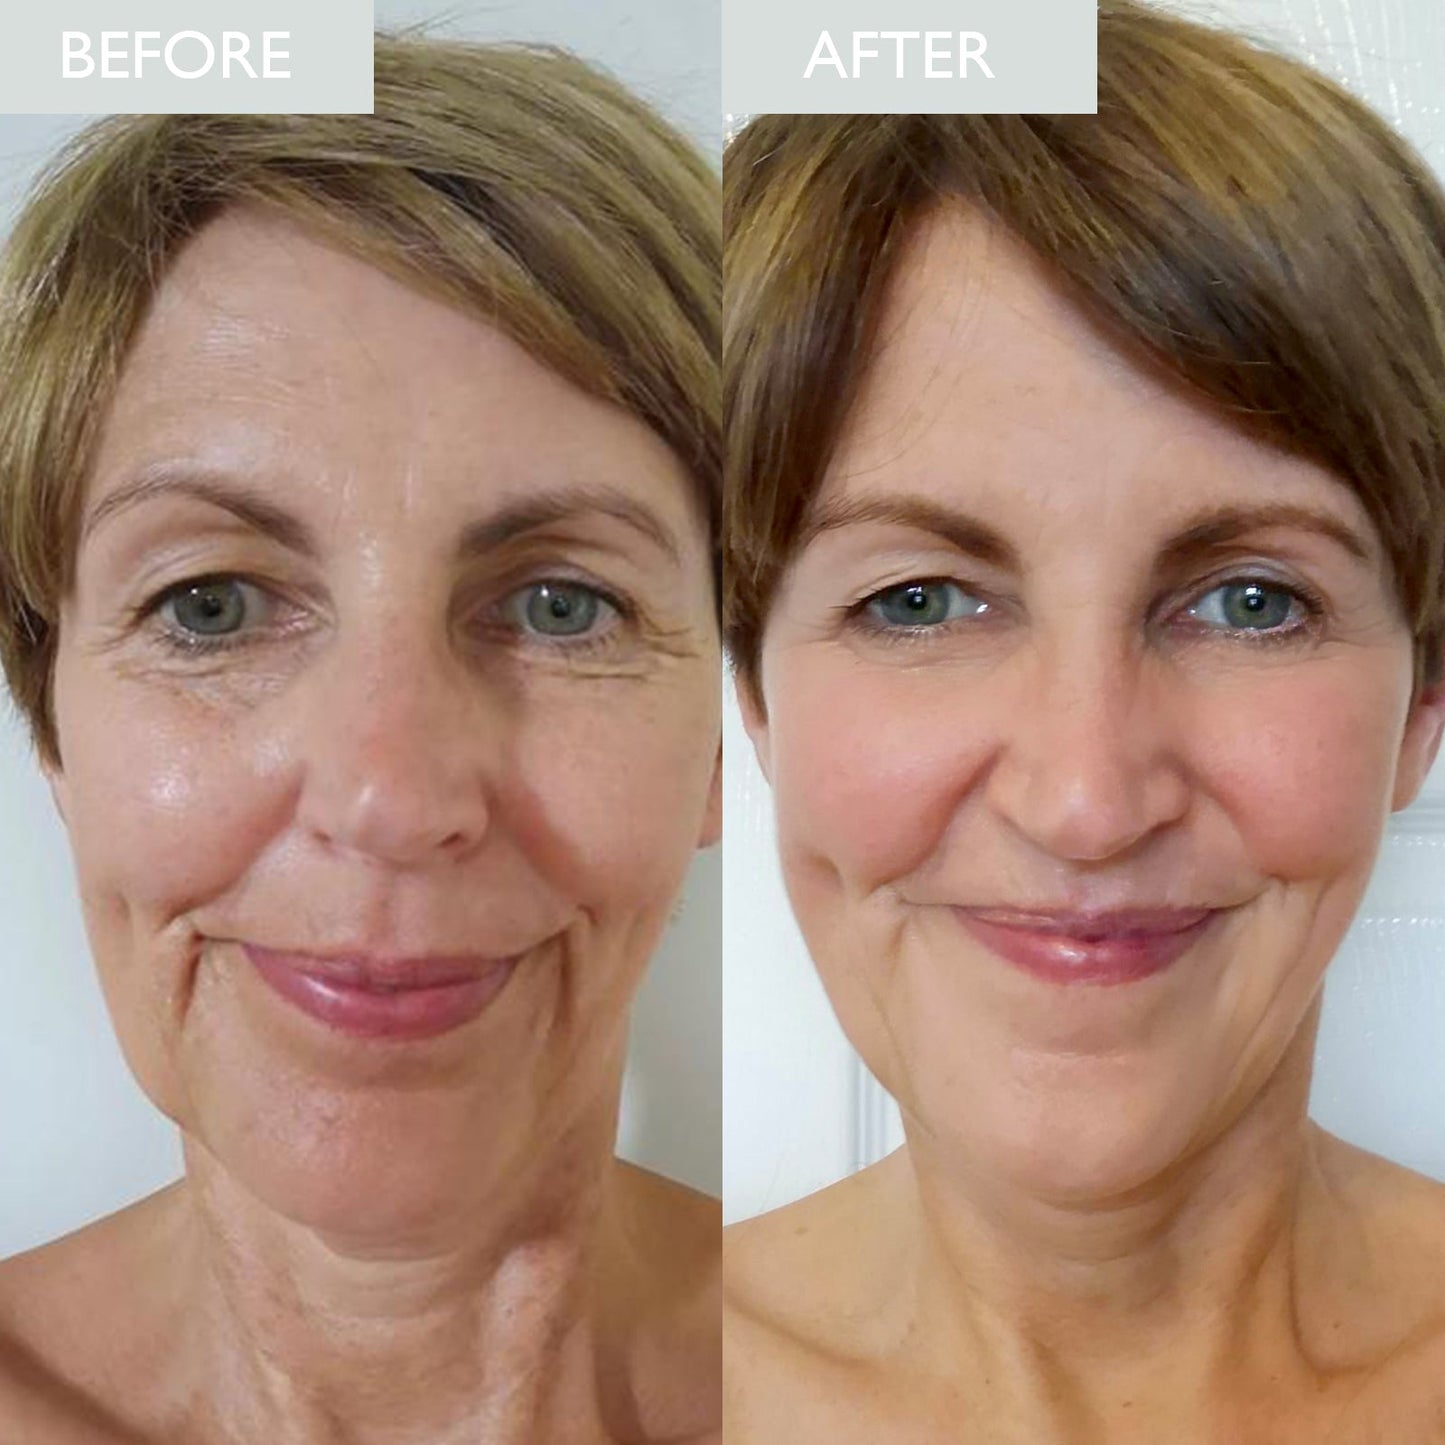 Before and after showing an overall improvement in skin ageing 